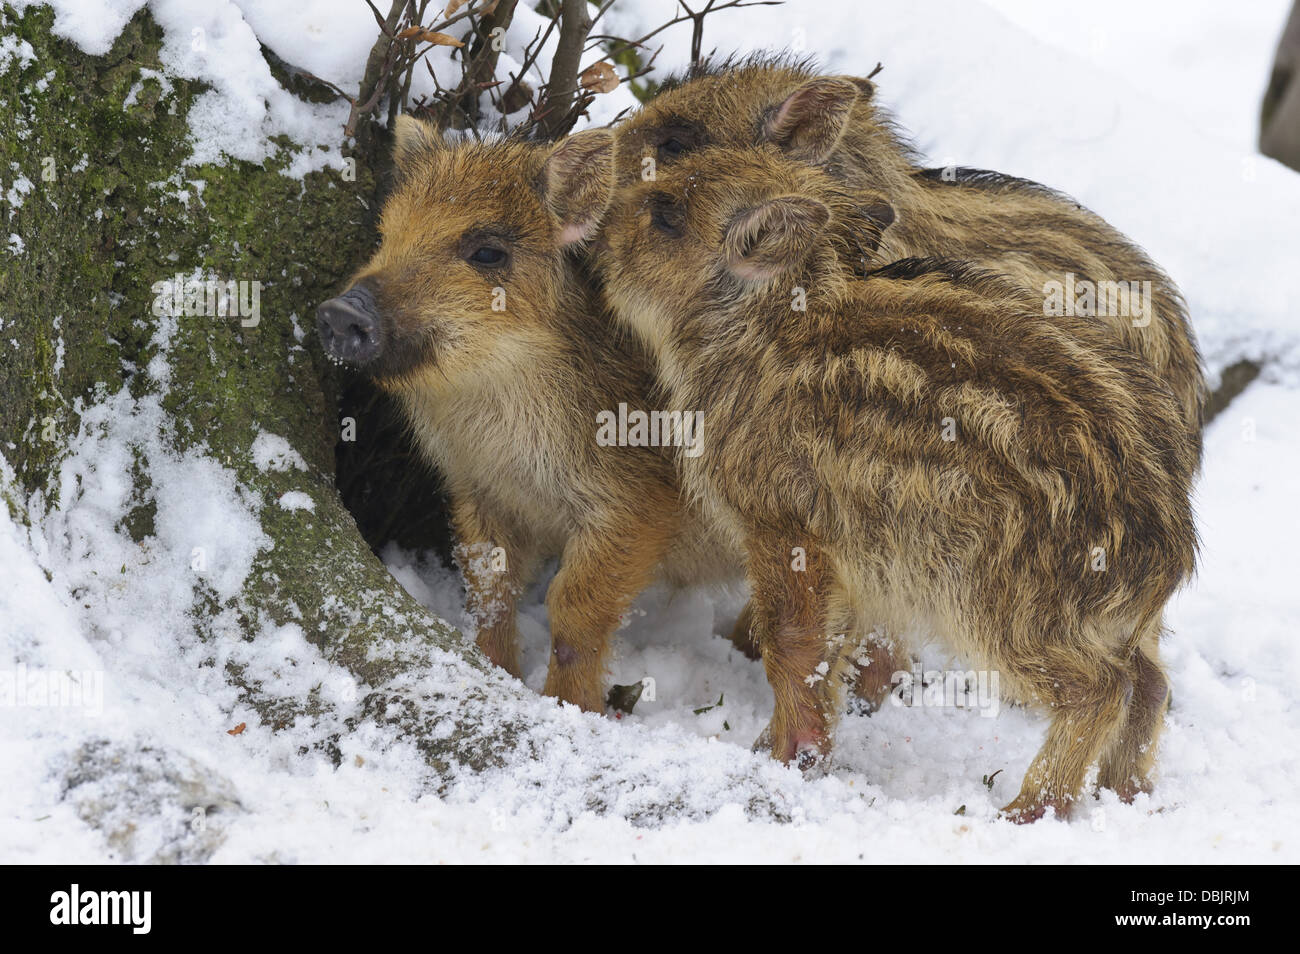 Young Wild boars in snow, Sus scrofa, Lower Saxony, Germany, Europe Stock Photo